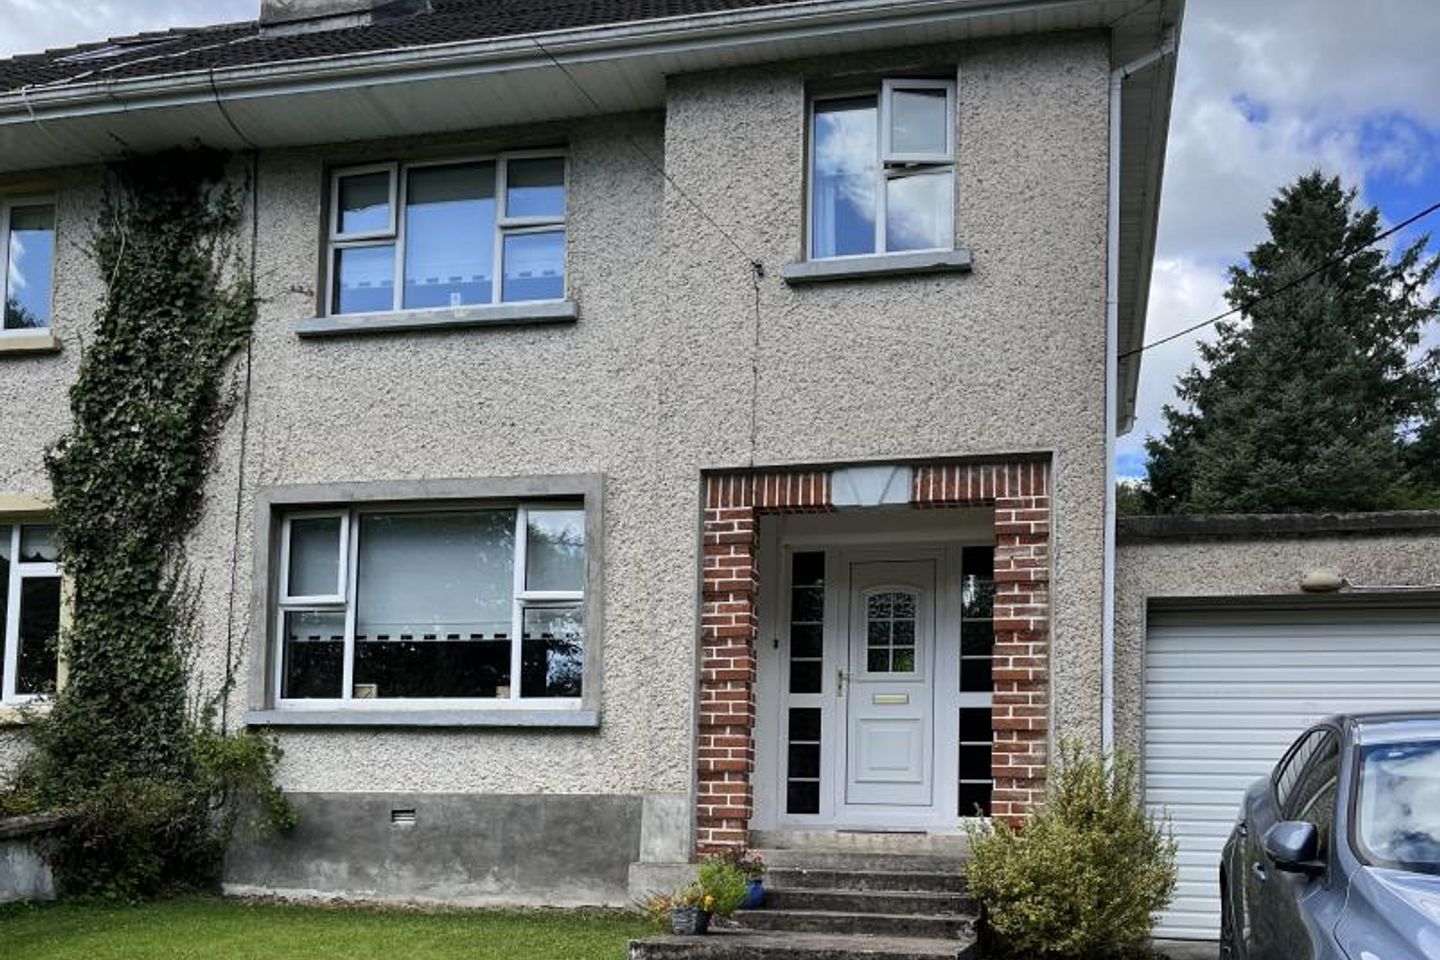 6 Drumcliffe Terrace, Donegal Town, Co. Donegal